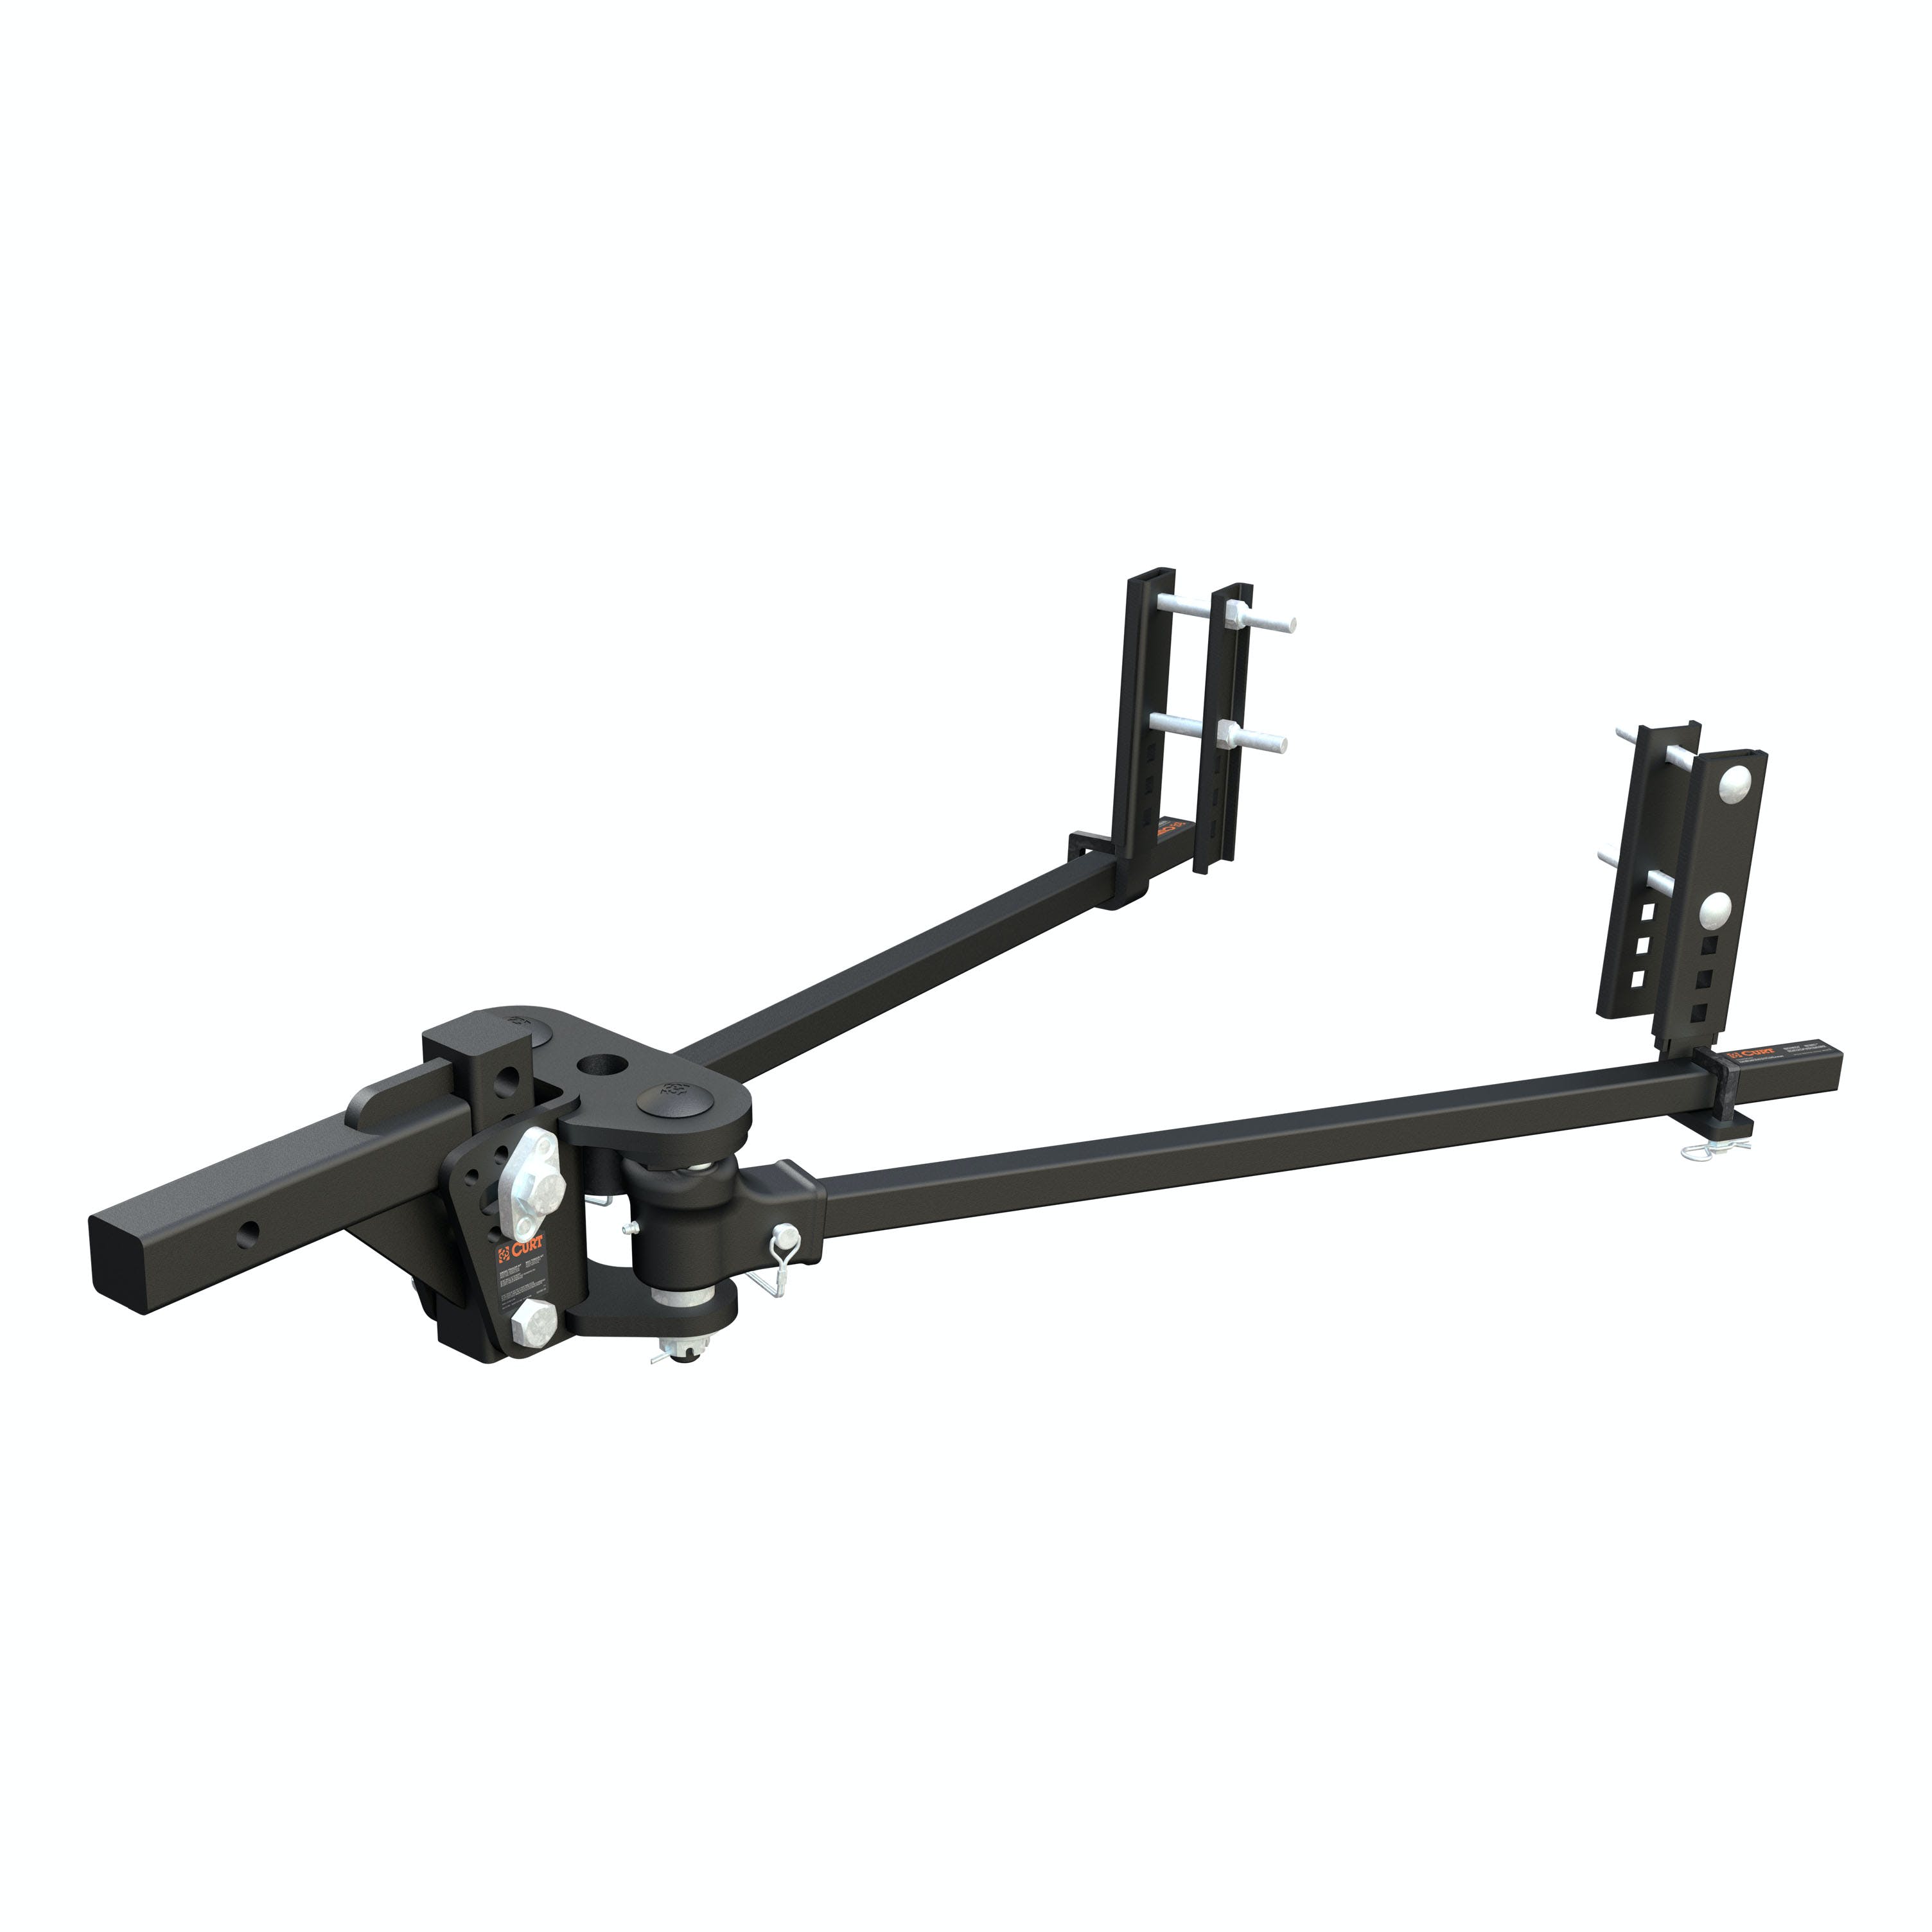 CURT 17499 TruTrack Weight Distribution Hitch with Sway Control (5-8K, 35-9/16 Bars)